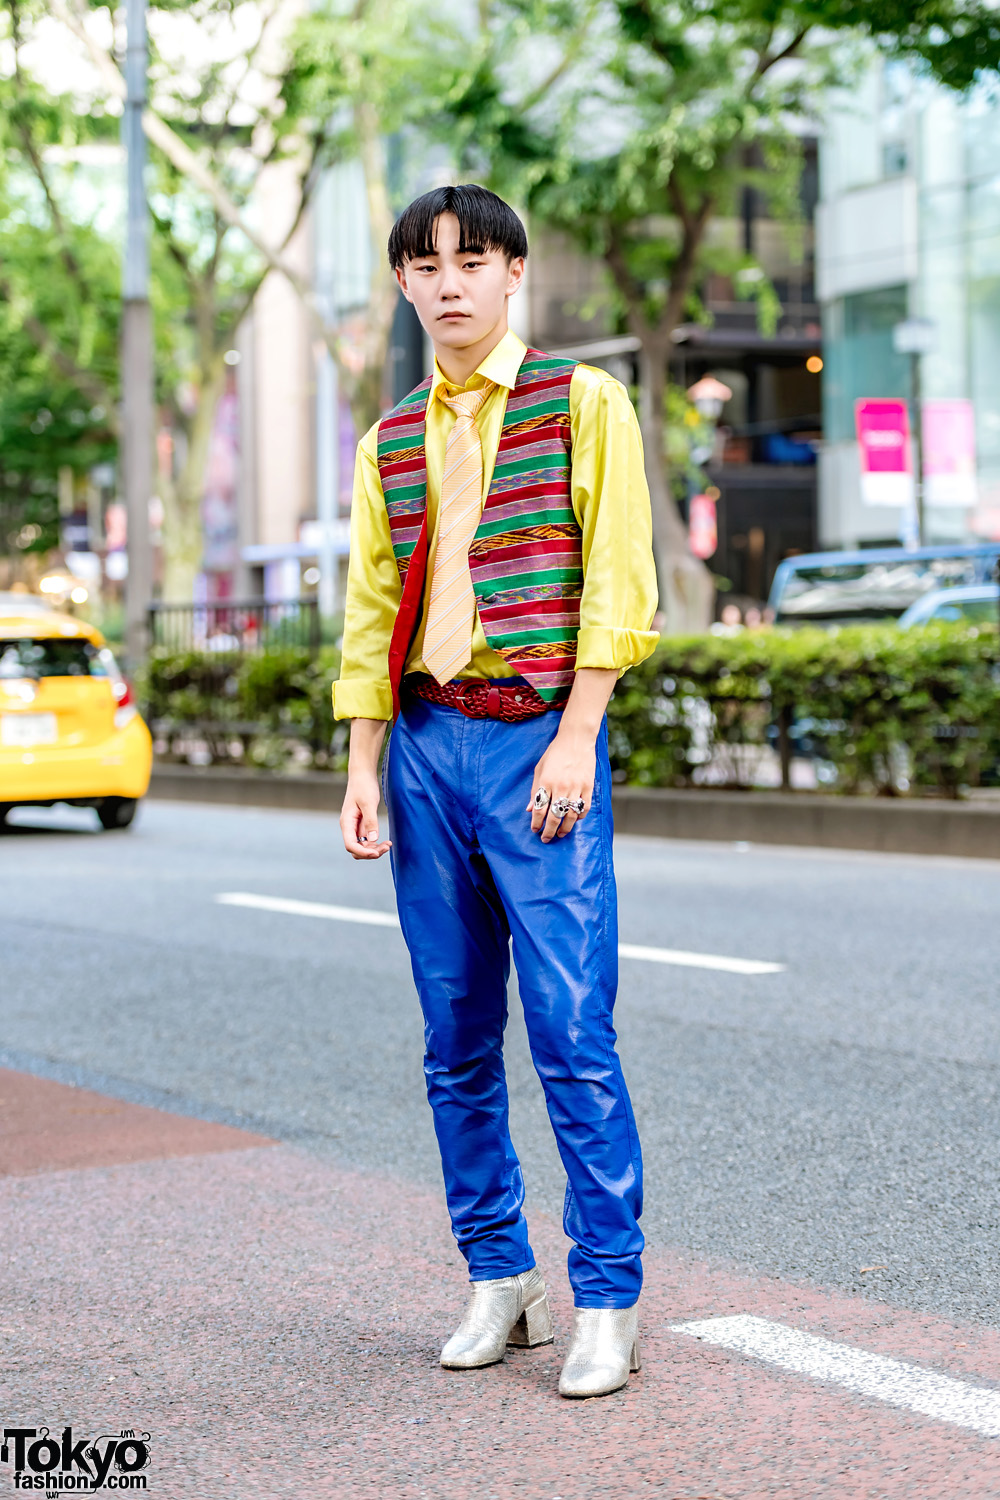 Colorful Japanese Street Style w/ Vintage Vest, Yellow Satin Shirt